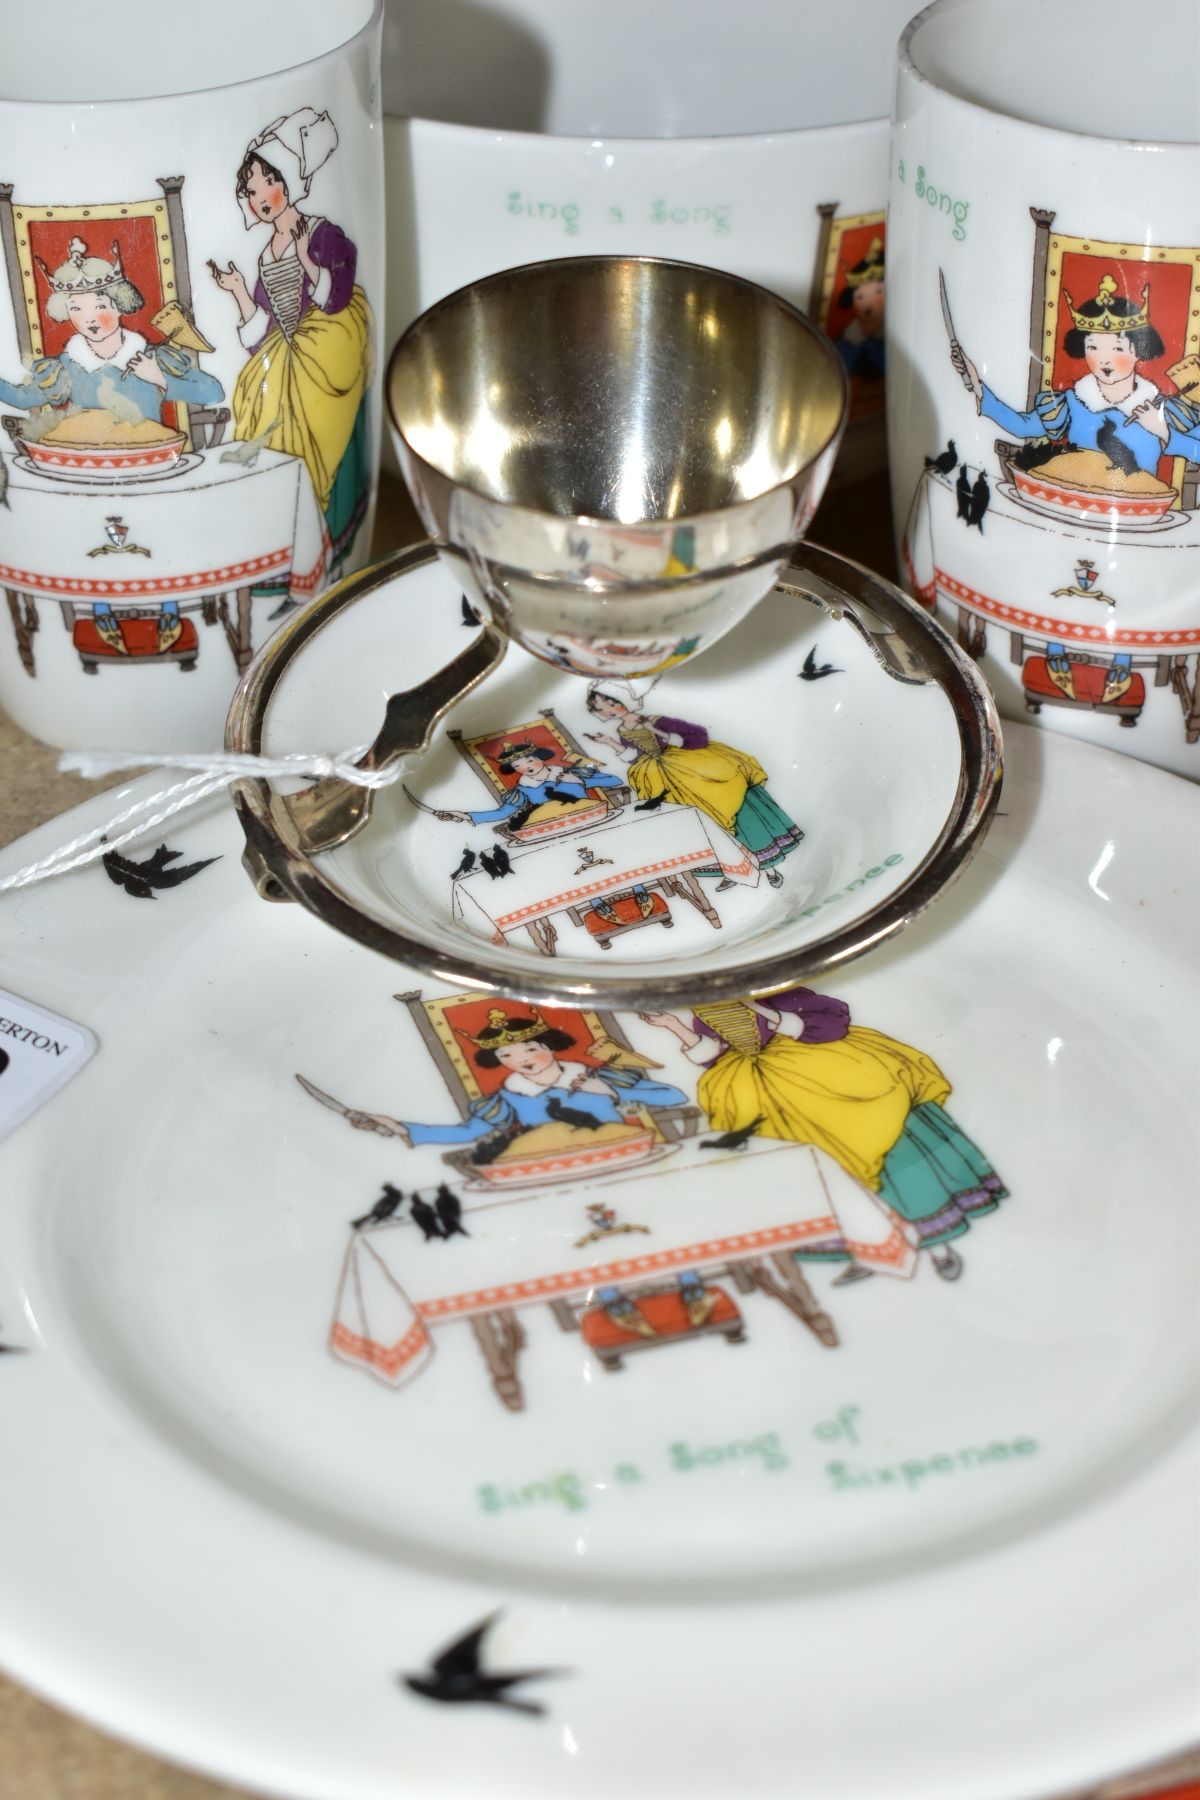 NINE PIECES OF ROYAL DOULTON CHINA NURSERY RHYMES SERIES WARE DESIGNED BY WILLIAM SAVAGE COOPER - Image 2 of 7